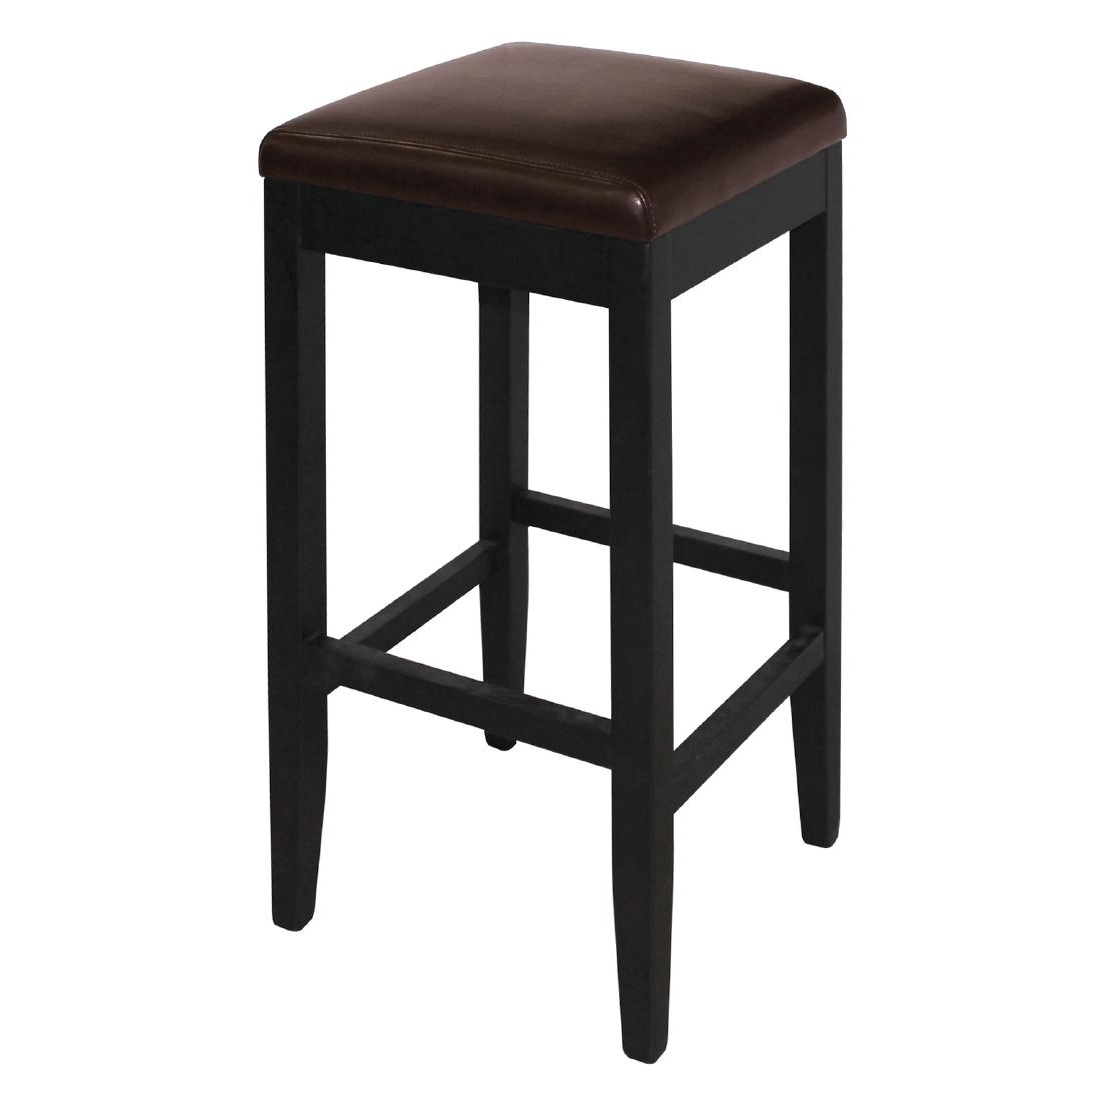 Bolero Faux Leather High Barstools Dark Brown (Pack of 2)